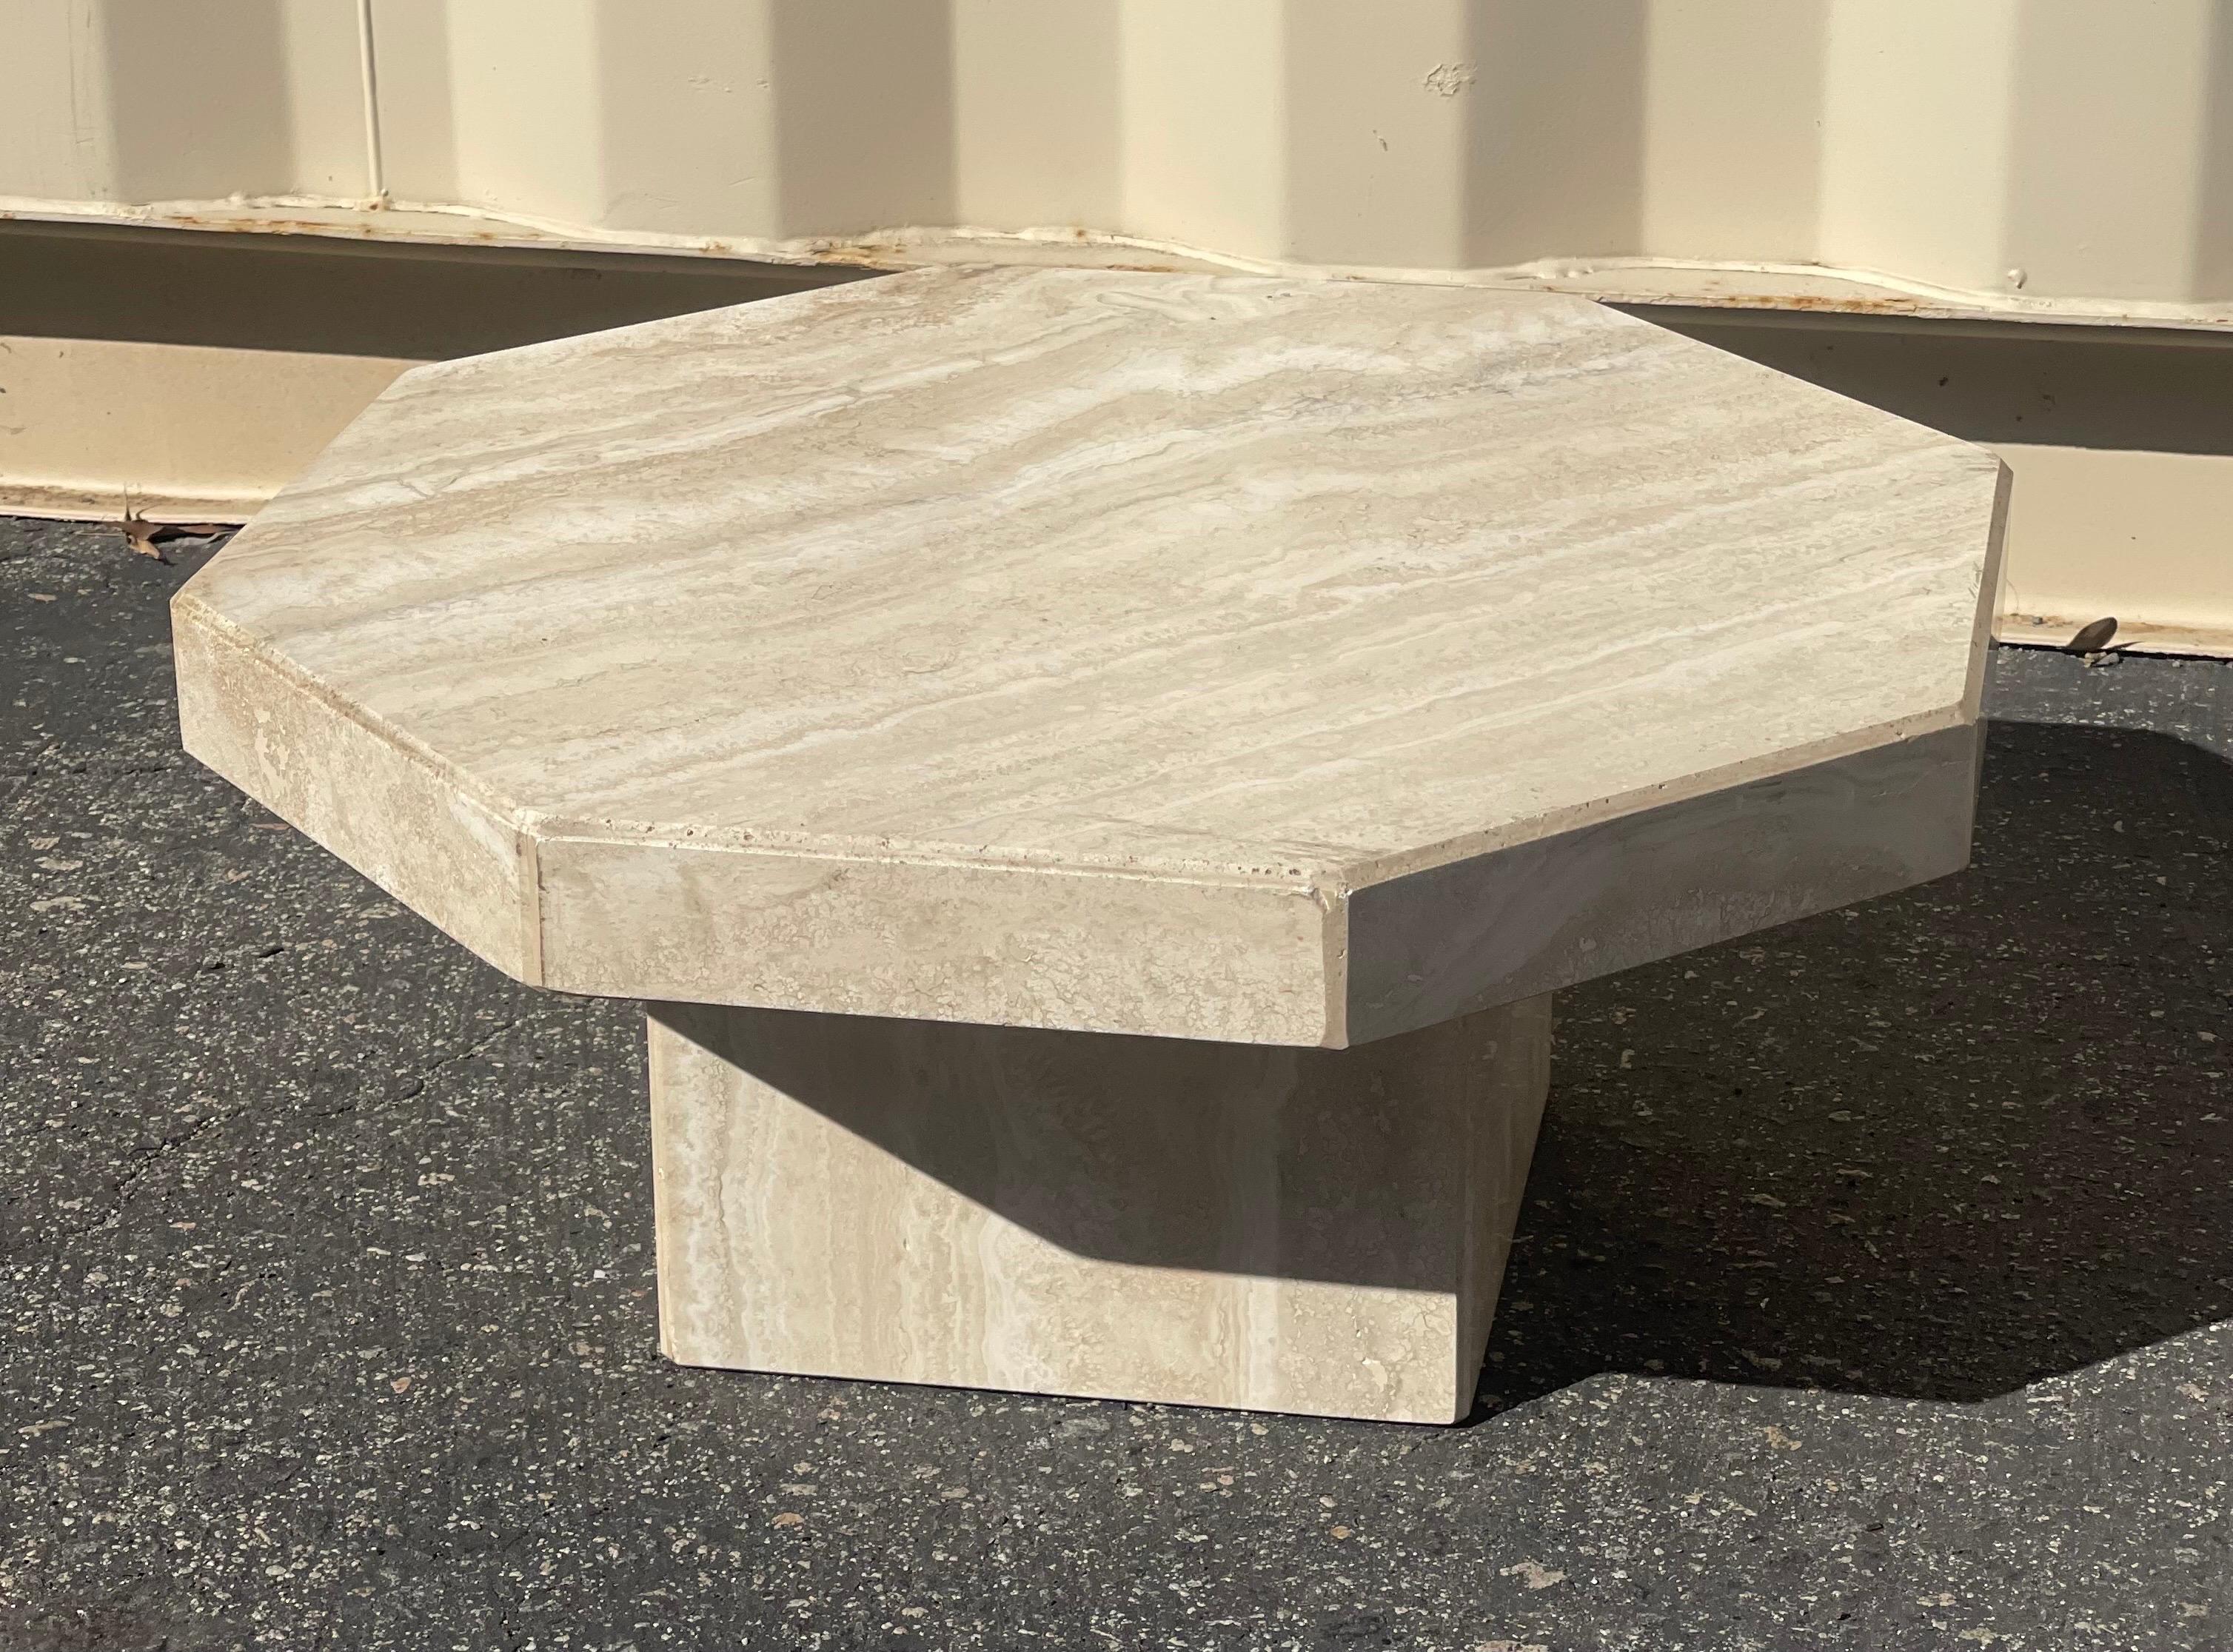 Low profile mid-century Italian travertine octagonal side table, circa 1970s. The two piece table is in very good vintage condition with no chips or cracks and measures 20.5